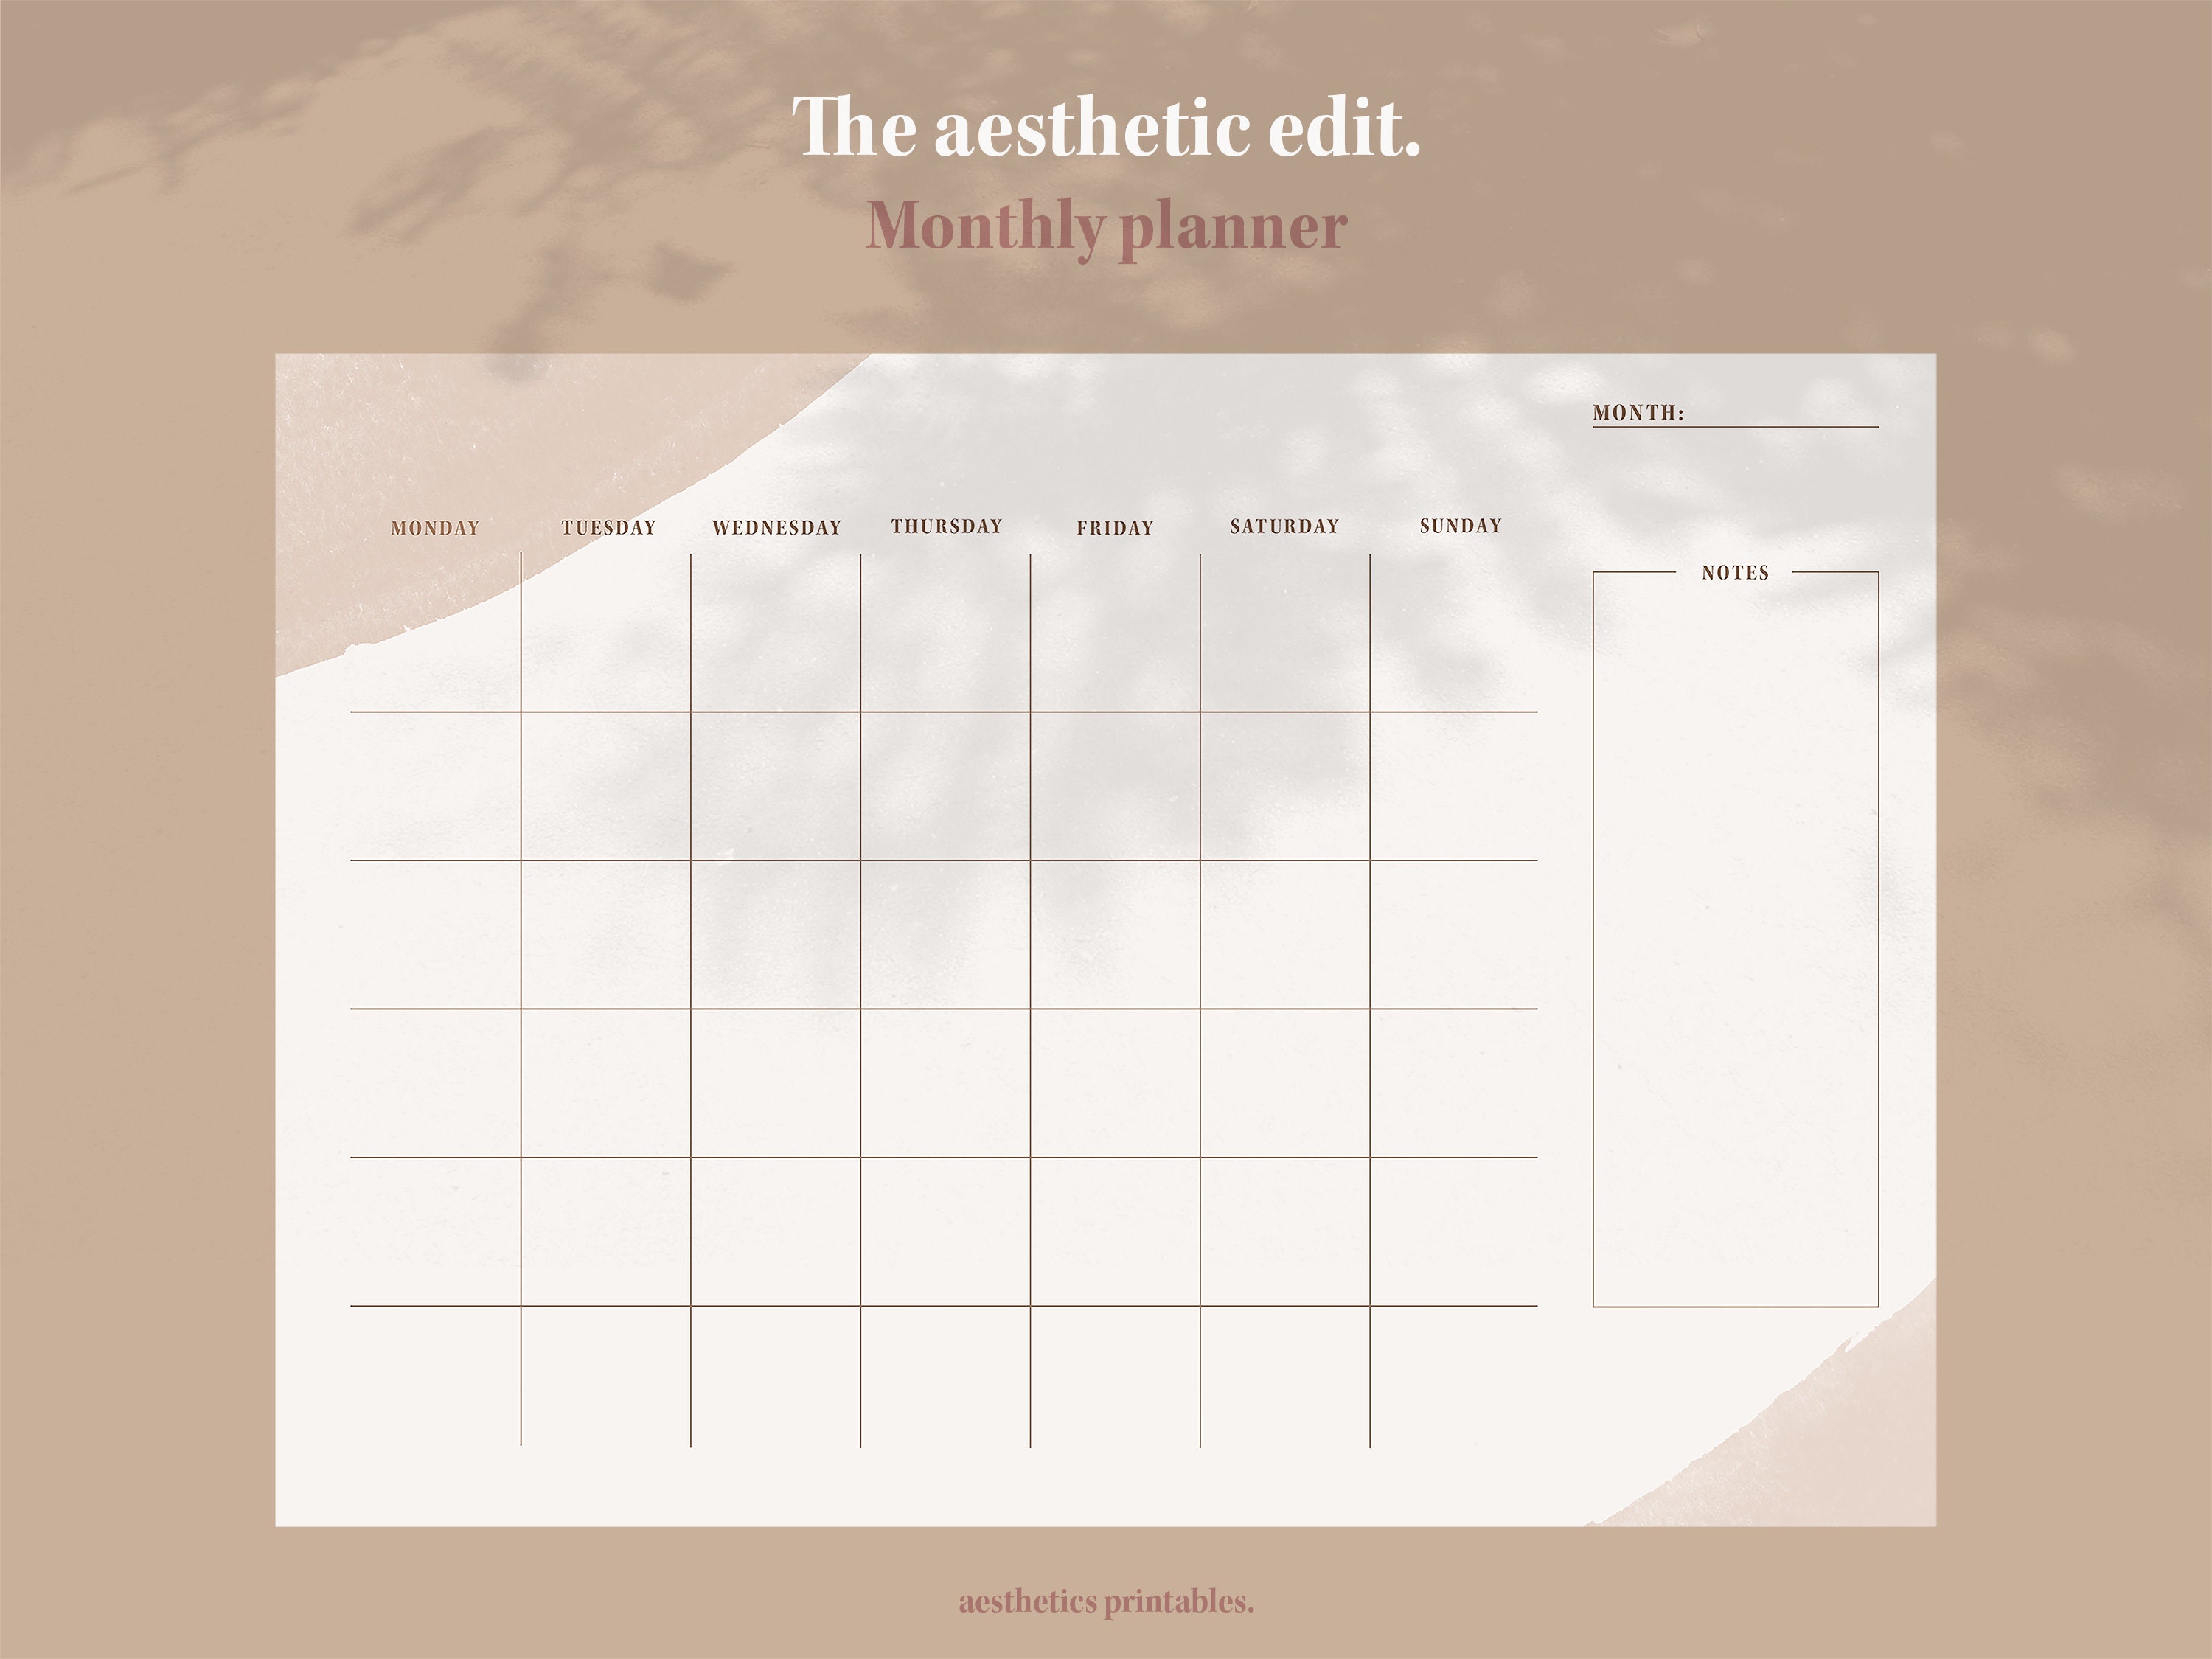 image result for aesthetic planner pages sp pinterest weekly schedule